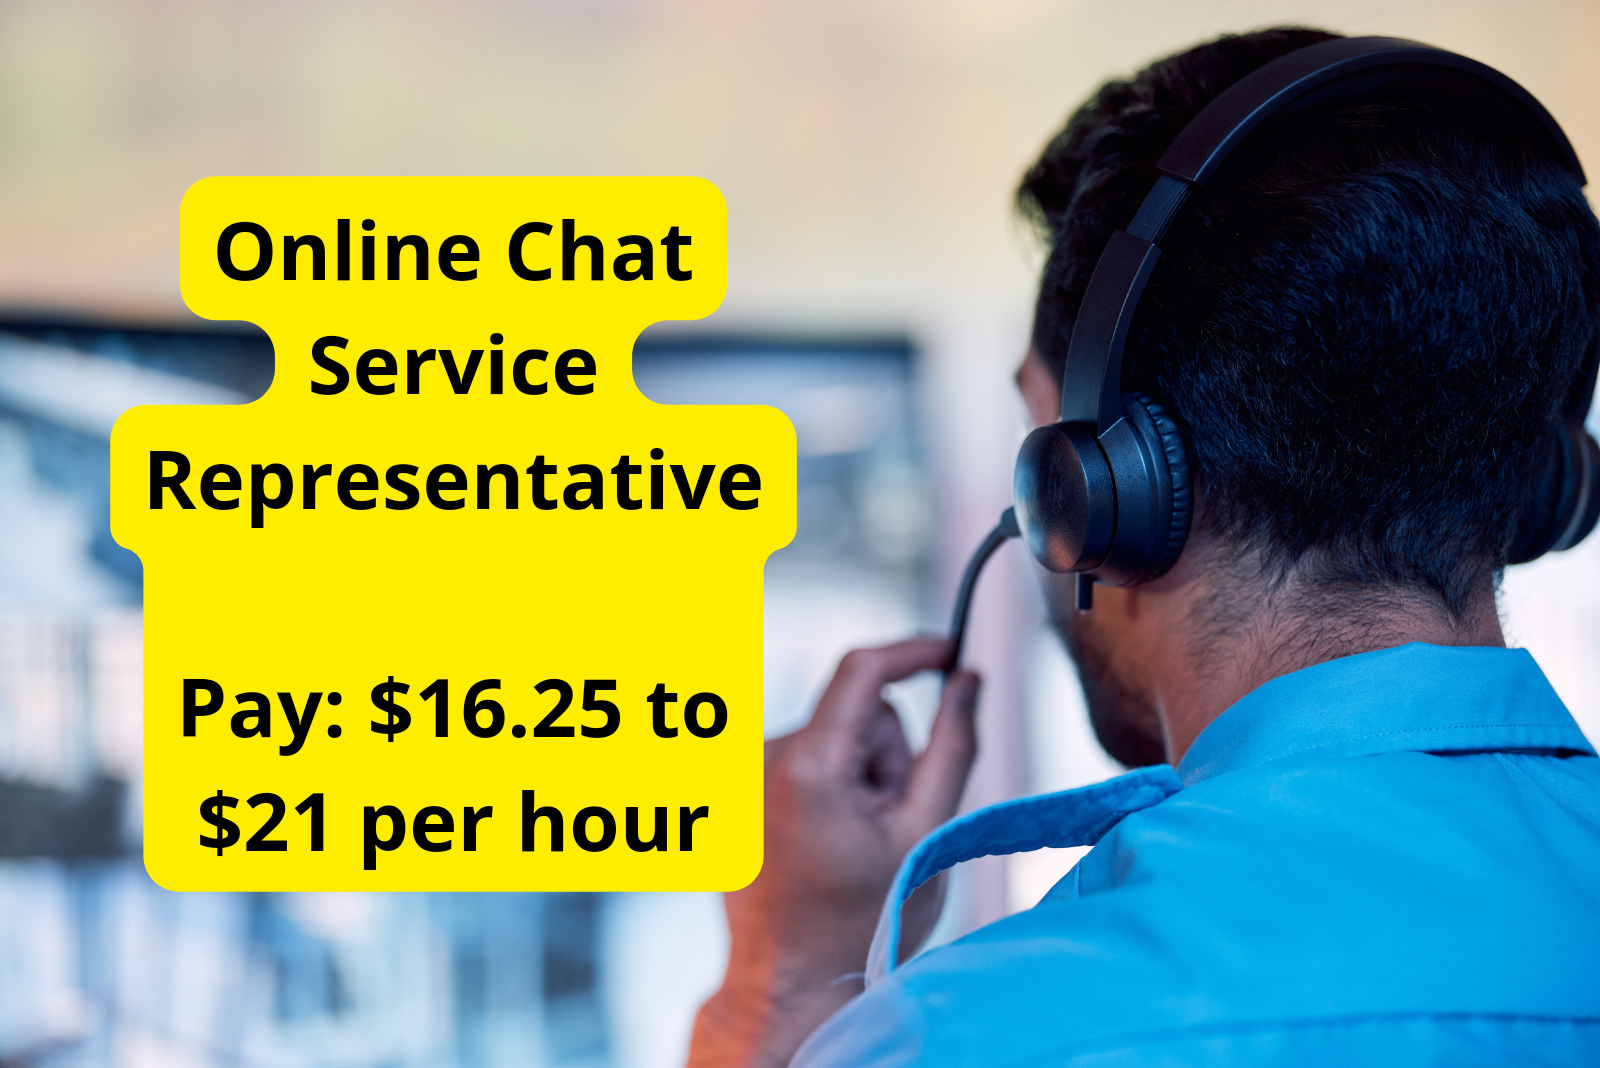 Online Chat Service Representative  Pay: $16.25 to $21 per hour